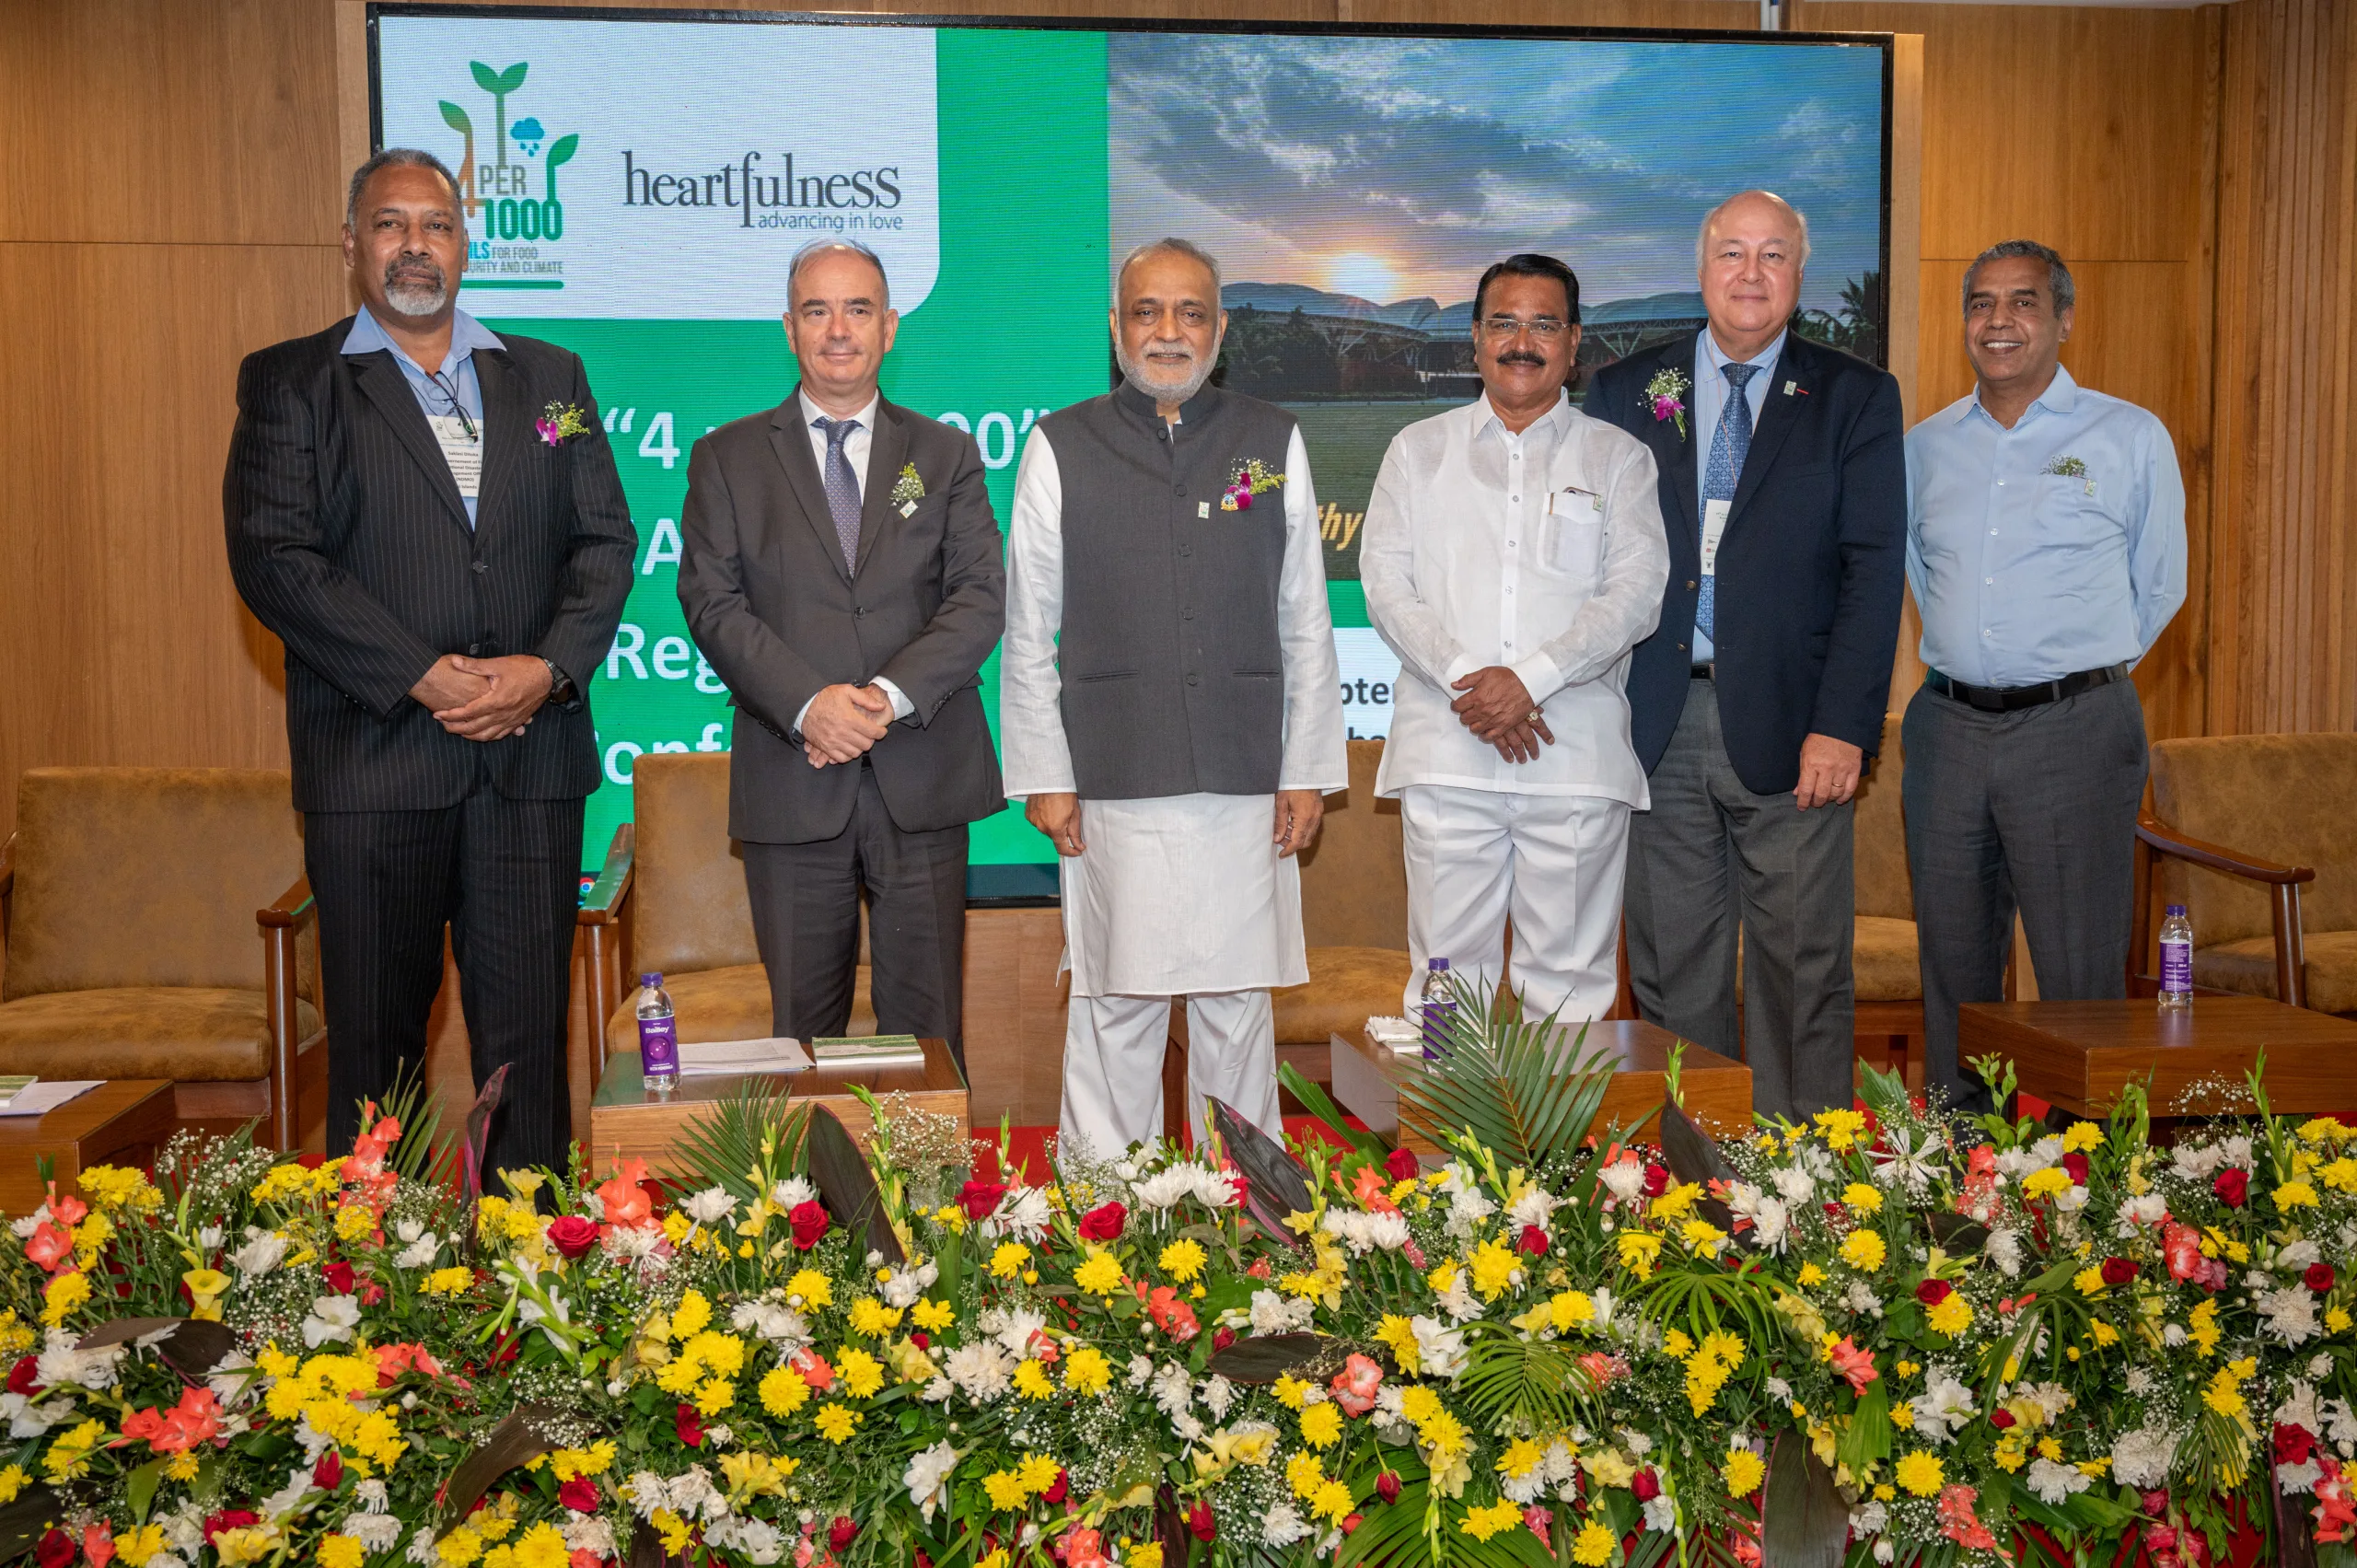 Agri ministries and NGOs from 18 countries come together for a three-day “4 per 1000 Asia-Pacific Regional Conference” hosted at Kanha Shanti Vanam